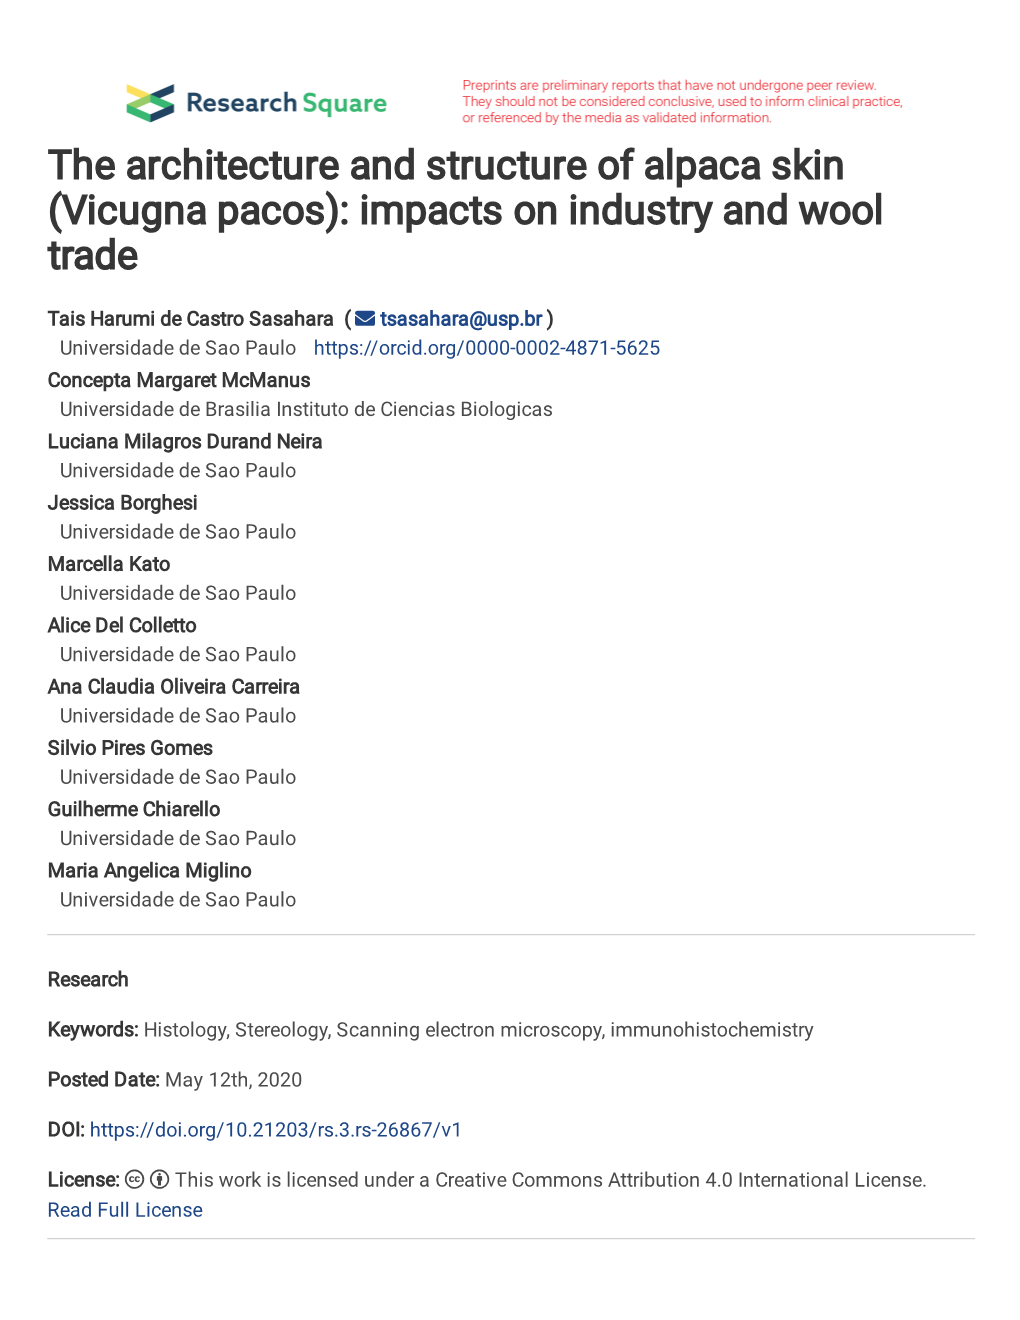 The Architecture and Structure of Alpaca Skin (Vicugna Pacos): Impacts on Industry and Wool Trade